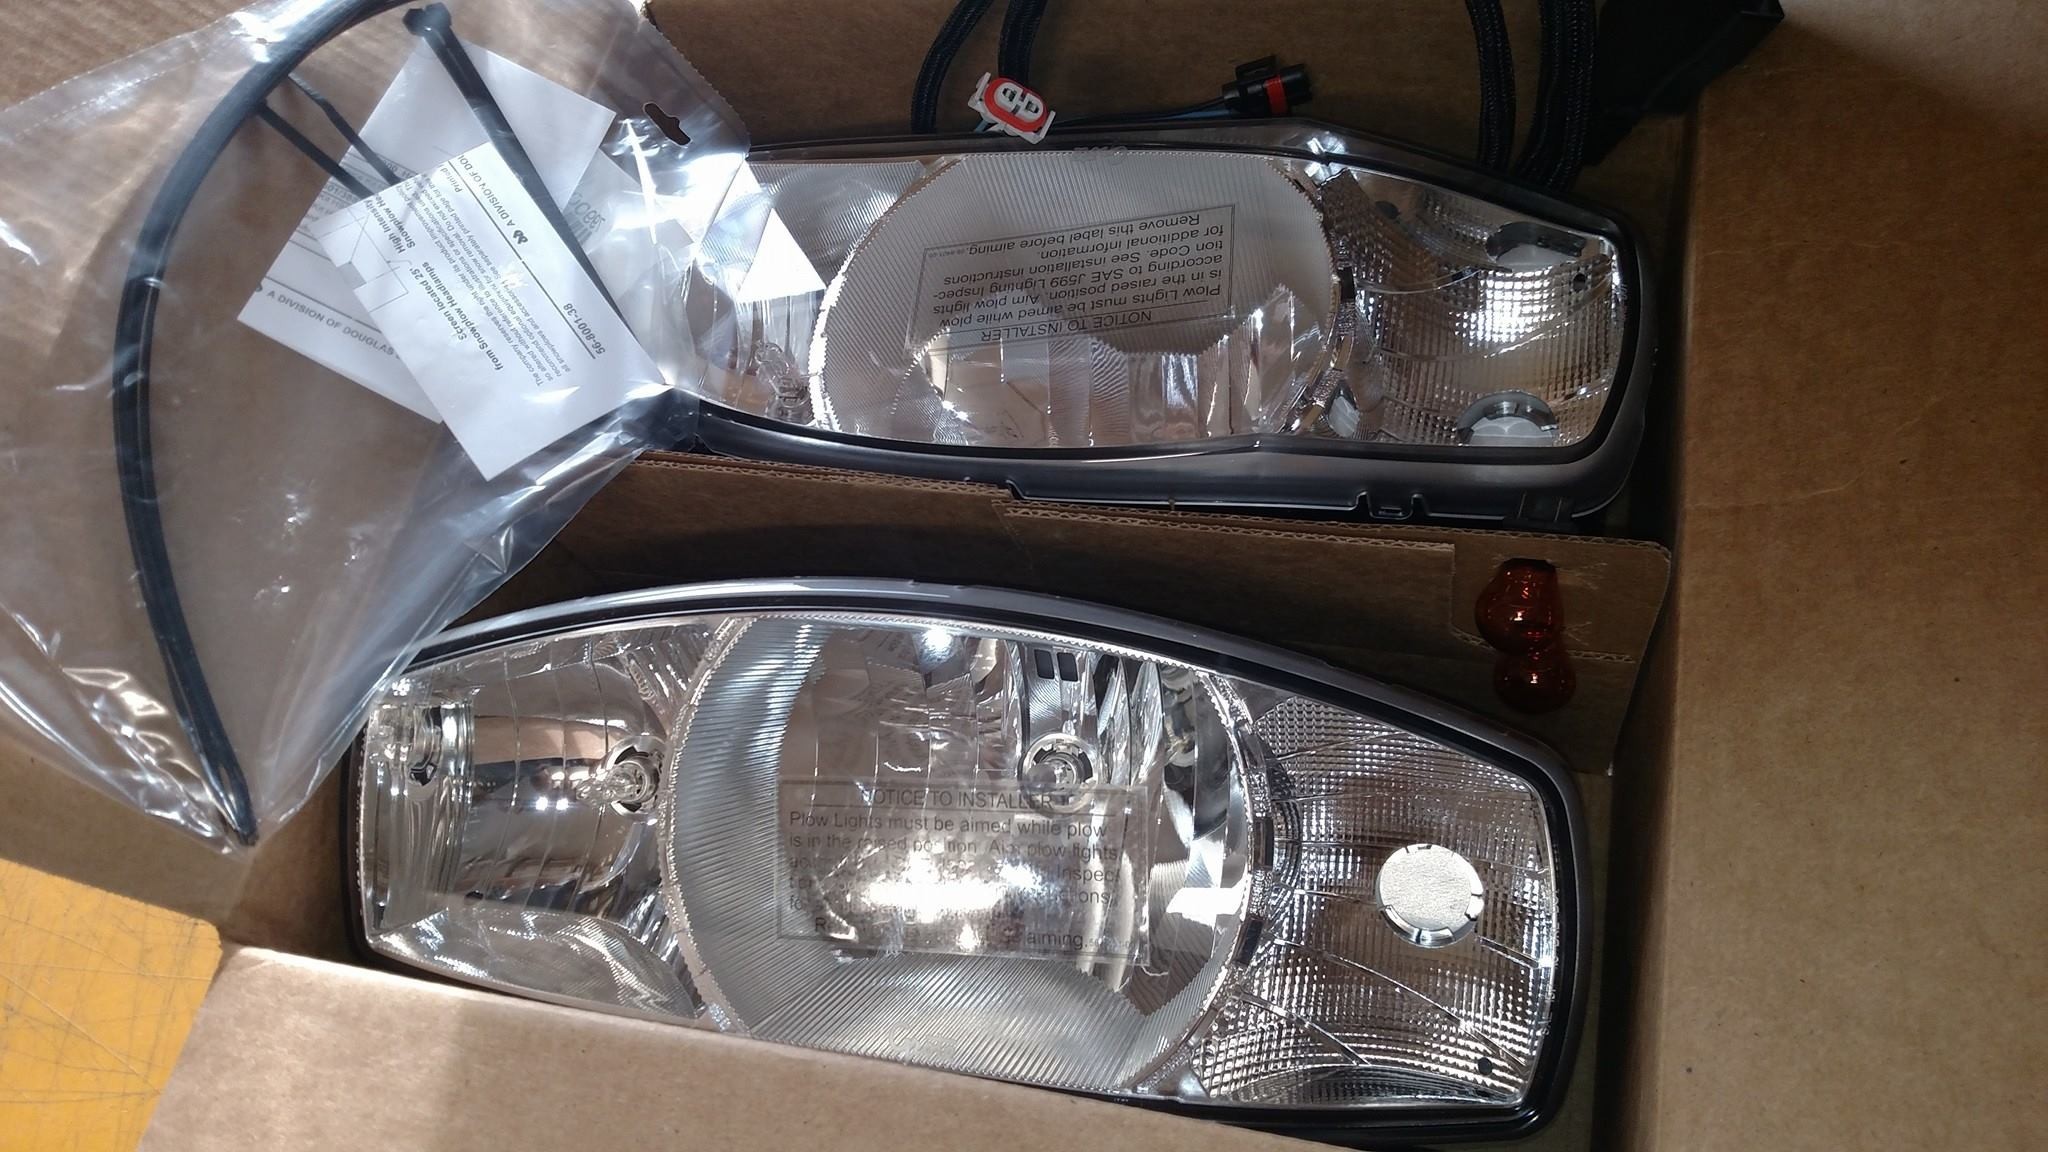 Sale new fisher plow lights